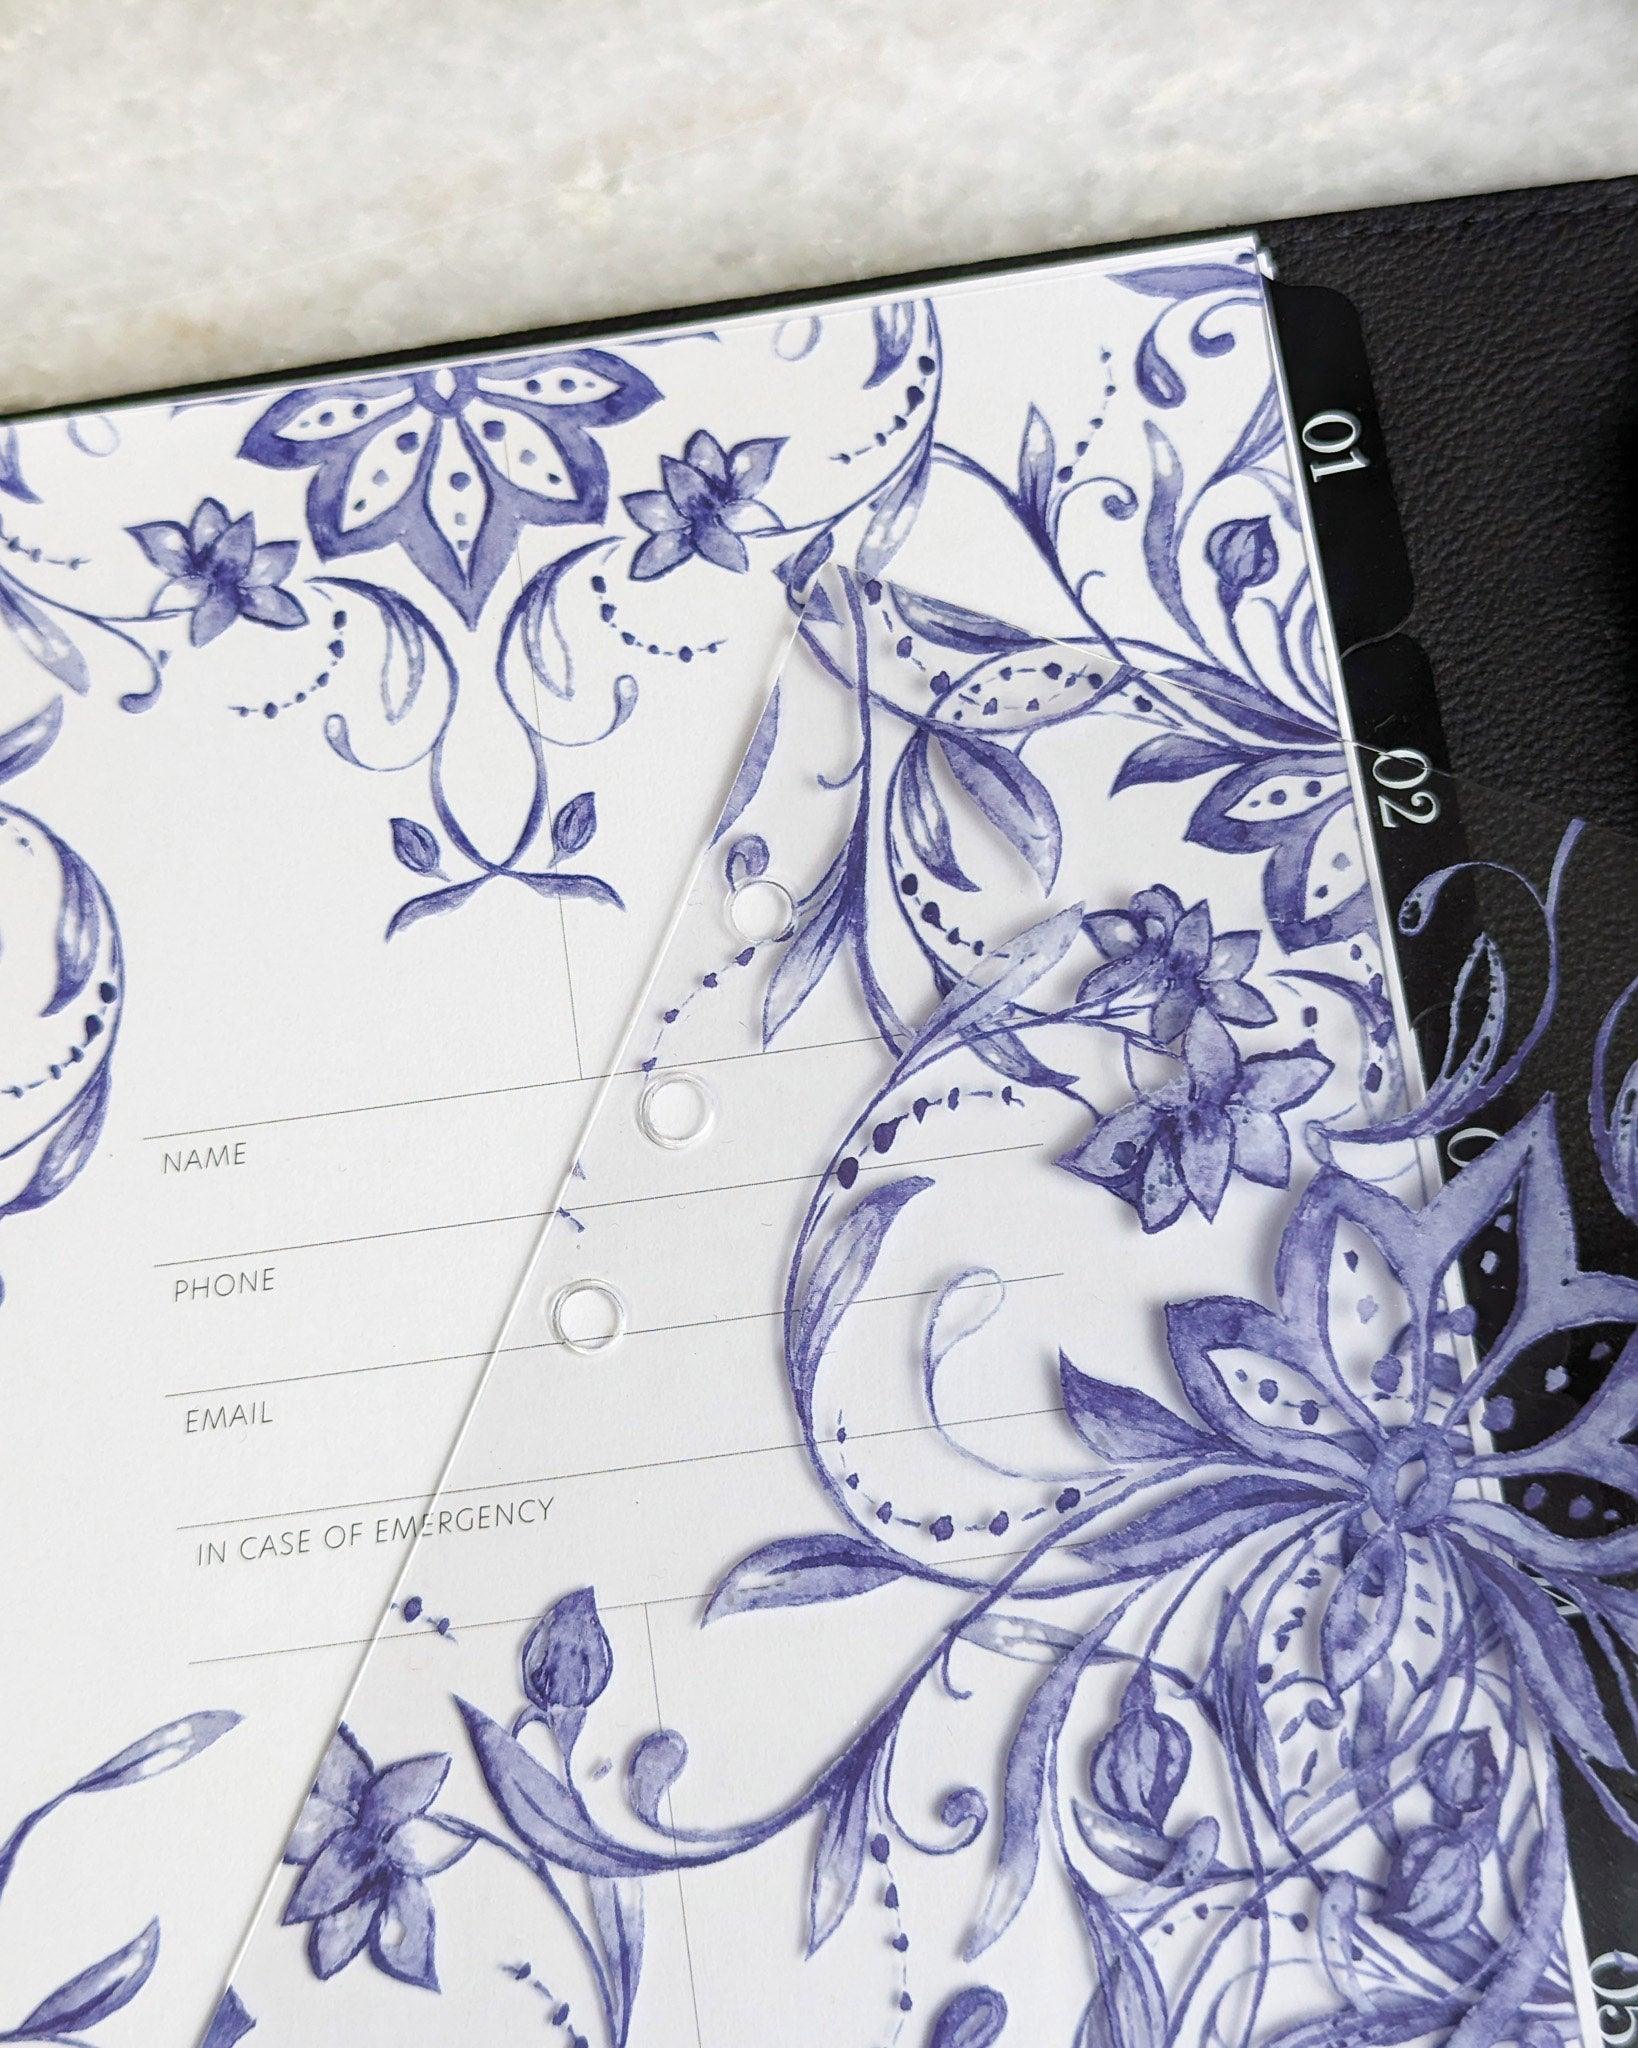 Blue filigree planner dashboards for A5 and Half-letter size planner systems by Jane's Agenda.